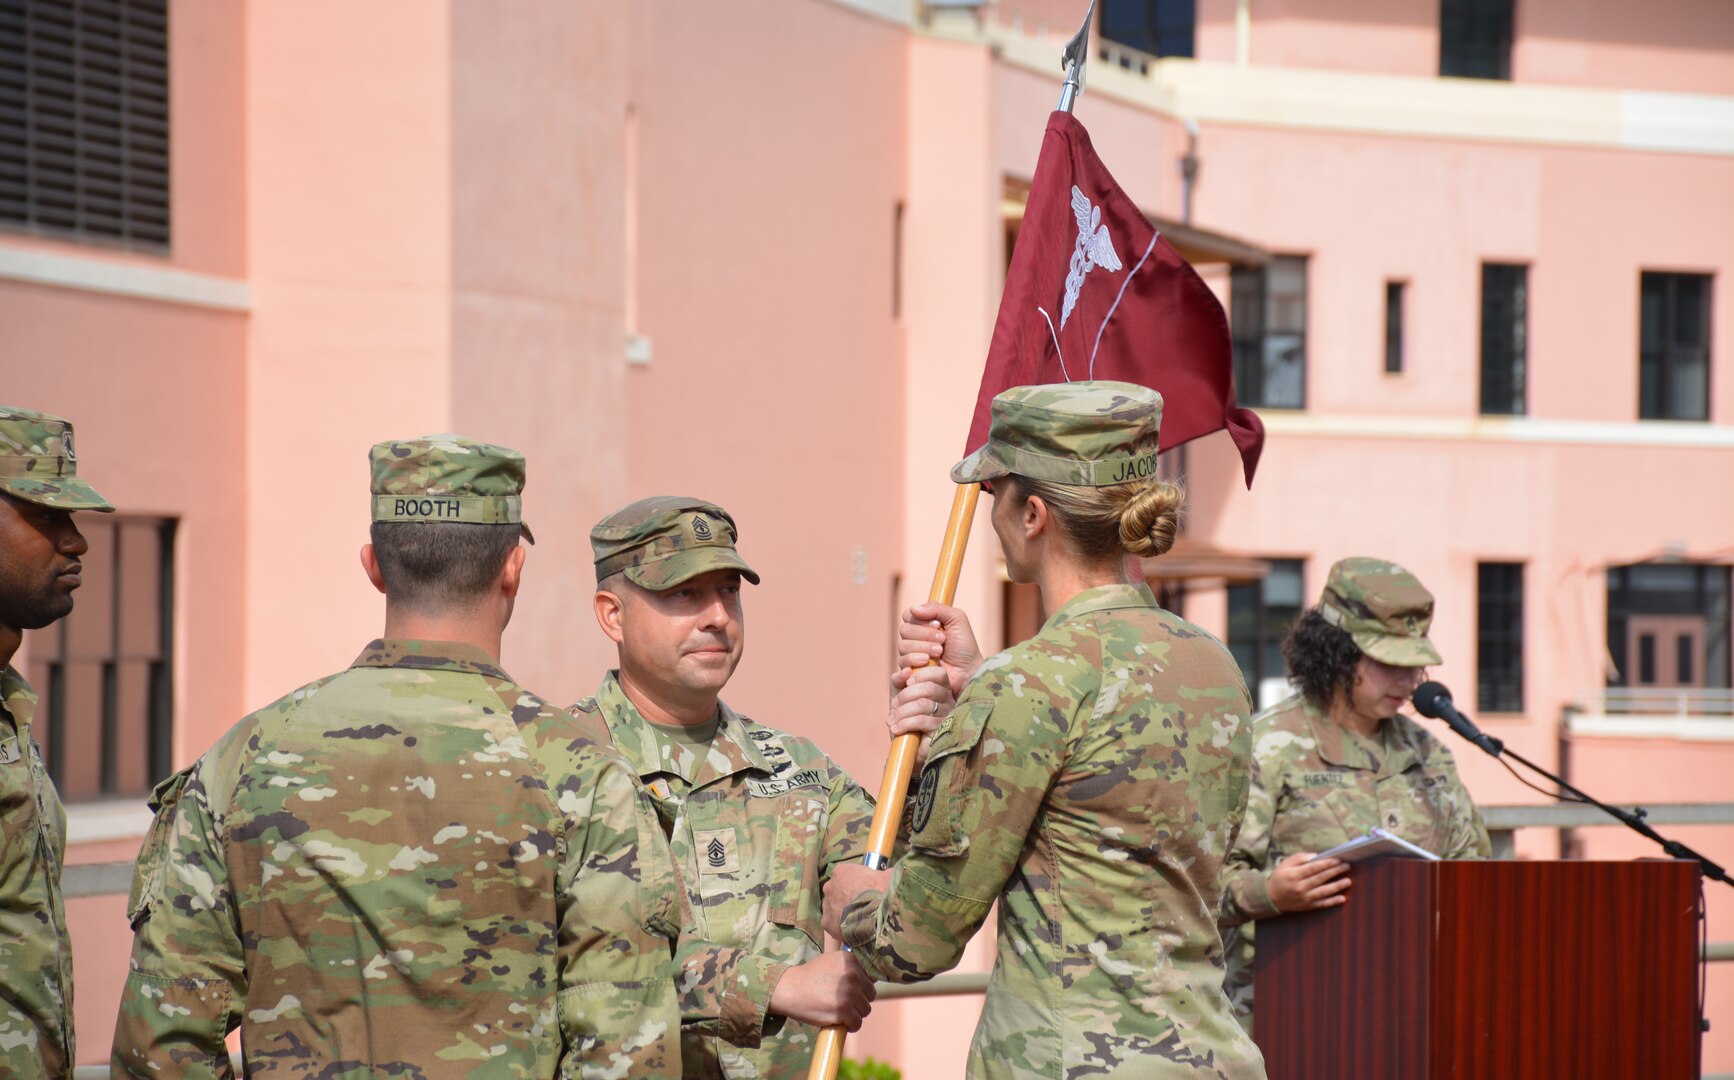 Alpha Company bids farewell to 1st Sgt. Nathan Kent and welcomes 1st Sgt. William Booth.